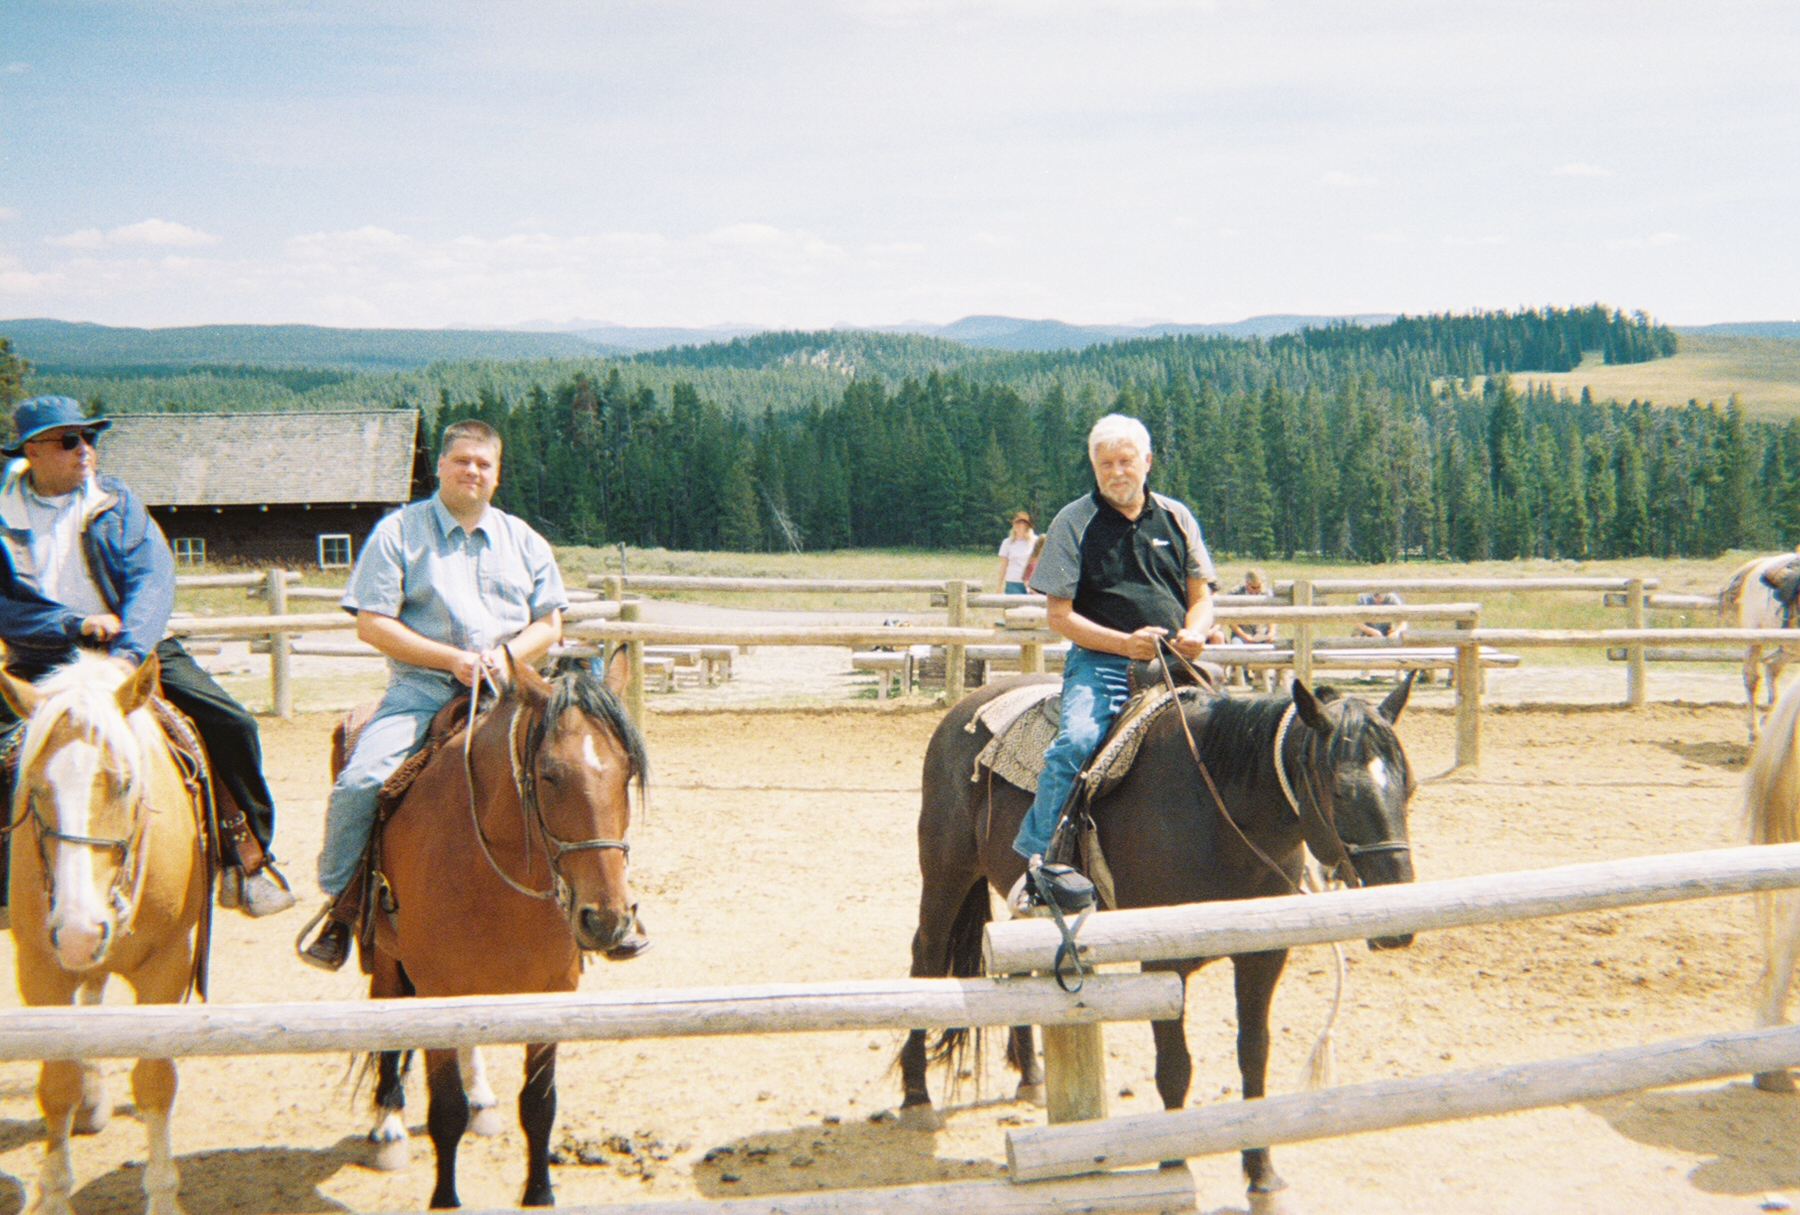 Me and my dad on horses.